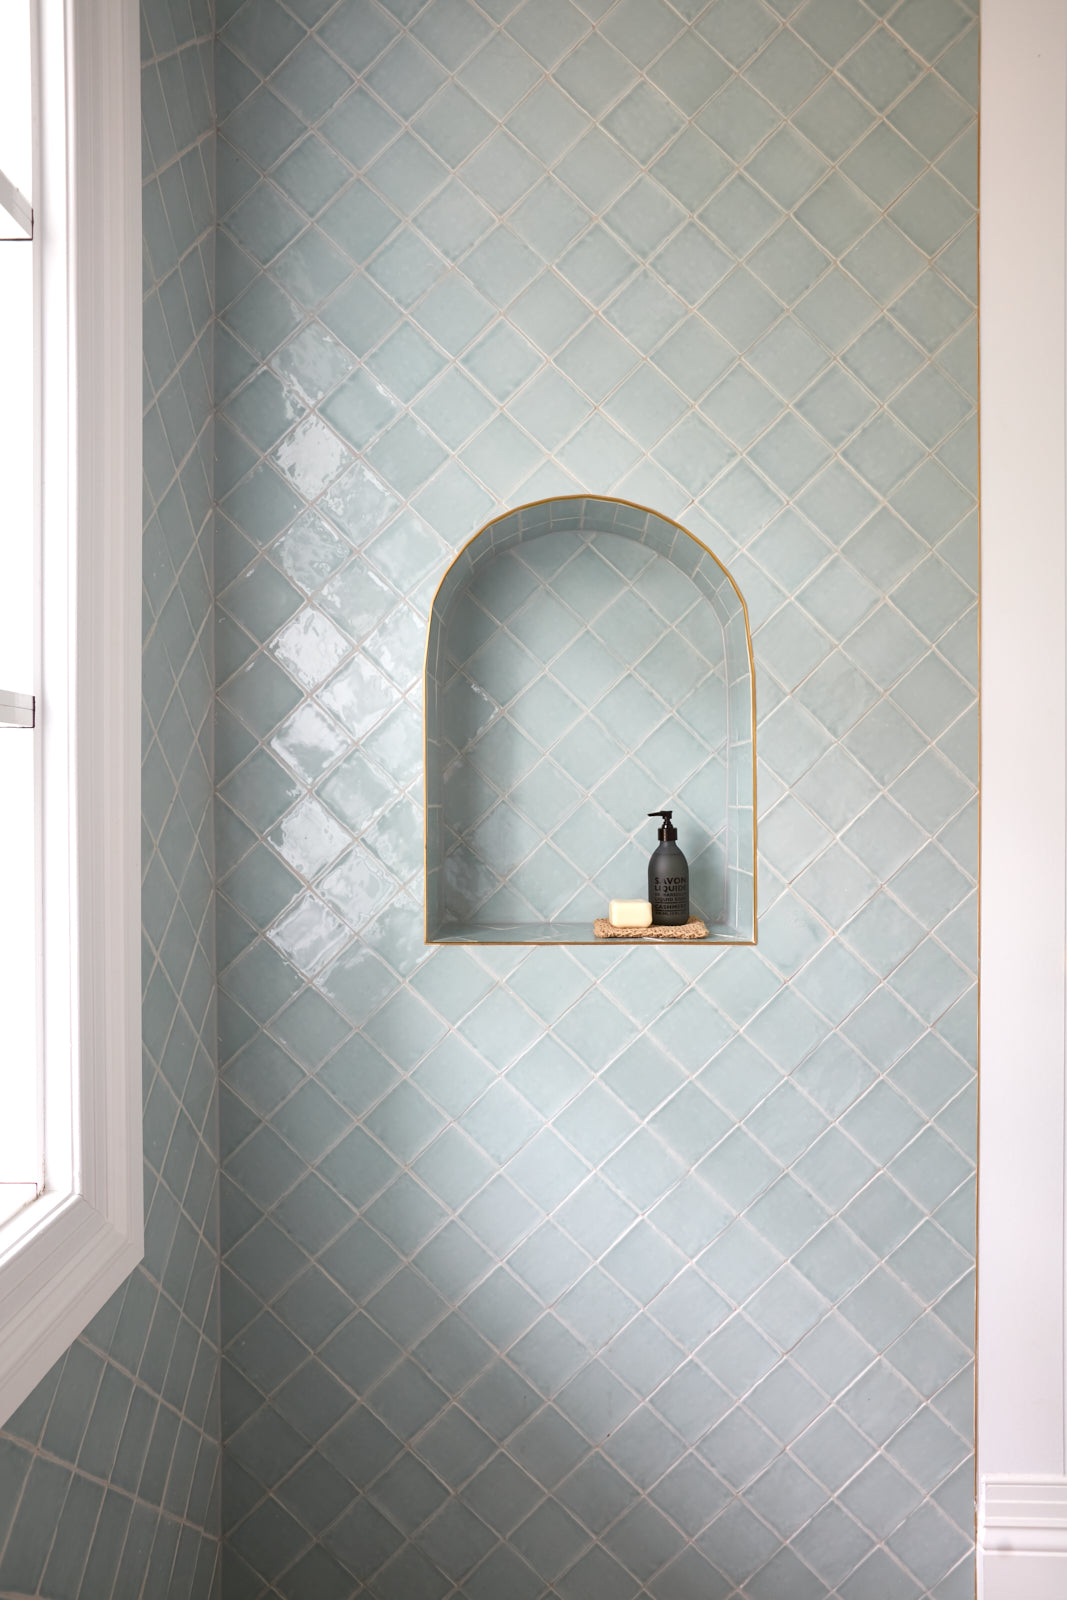 Choosing the right tile trim for your project